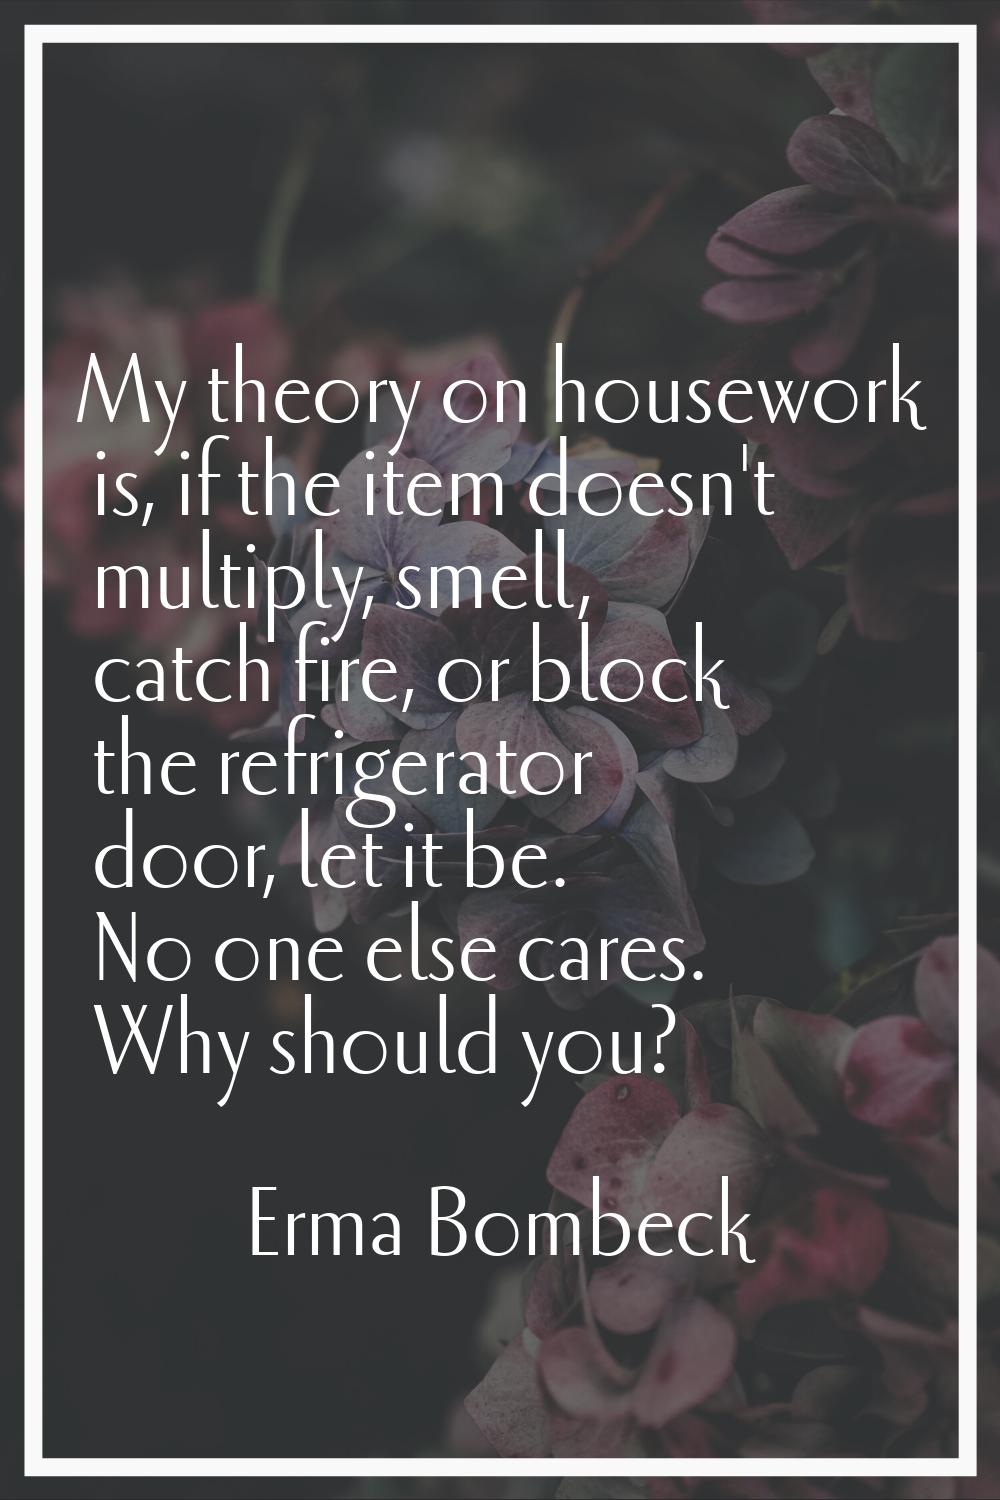 My theory on housework is, if the item doesn't multiply, smell, catch fire, or block the refrigerat